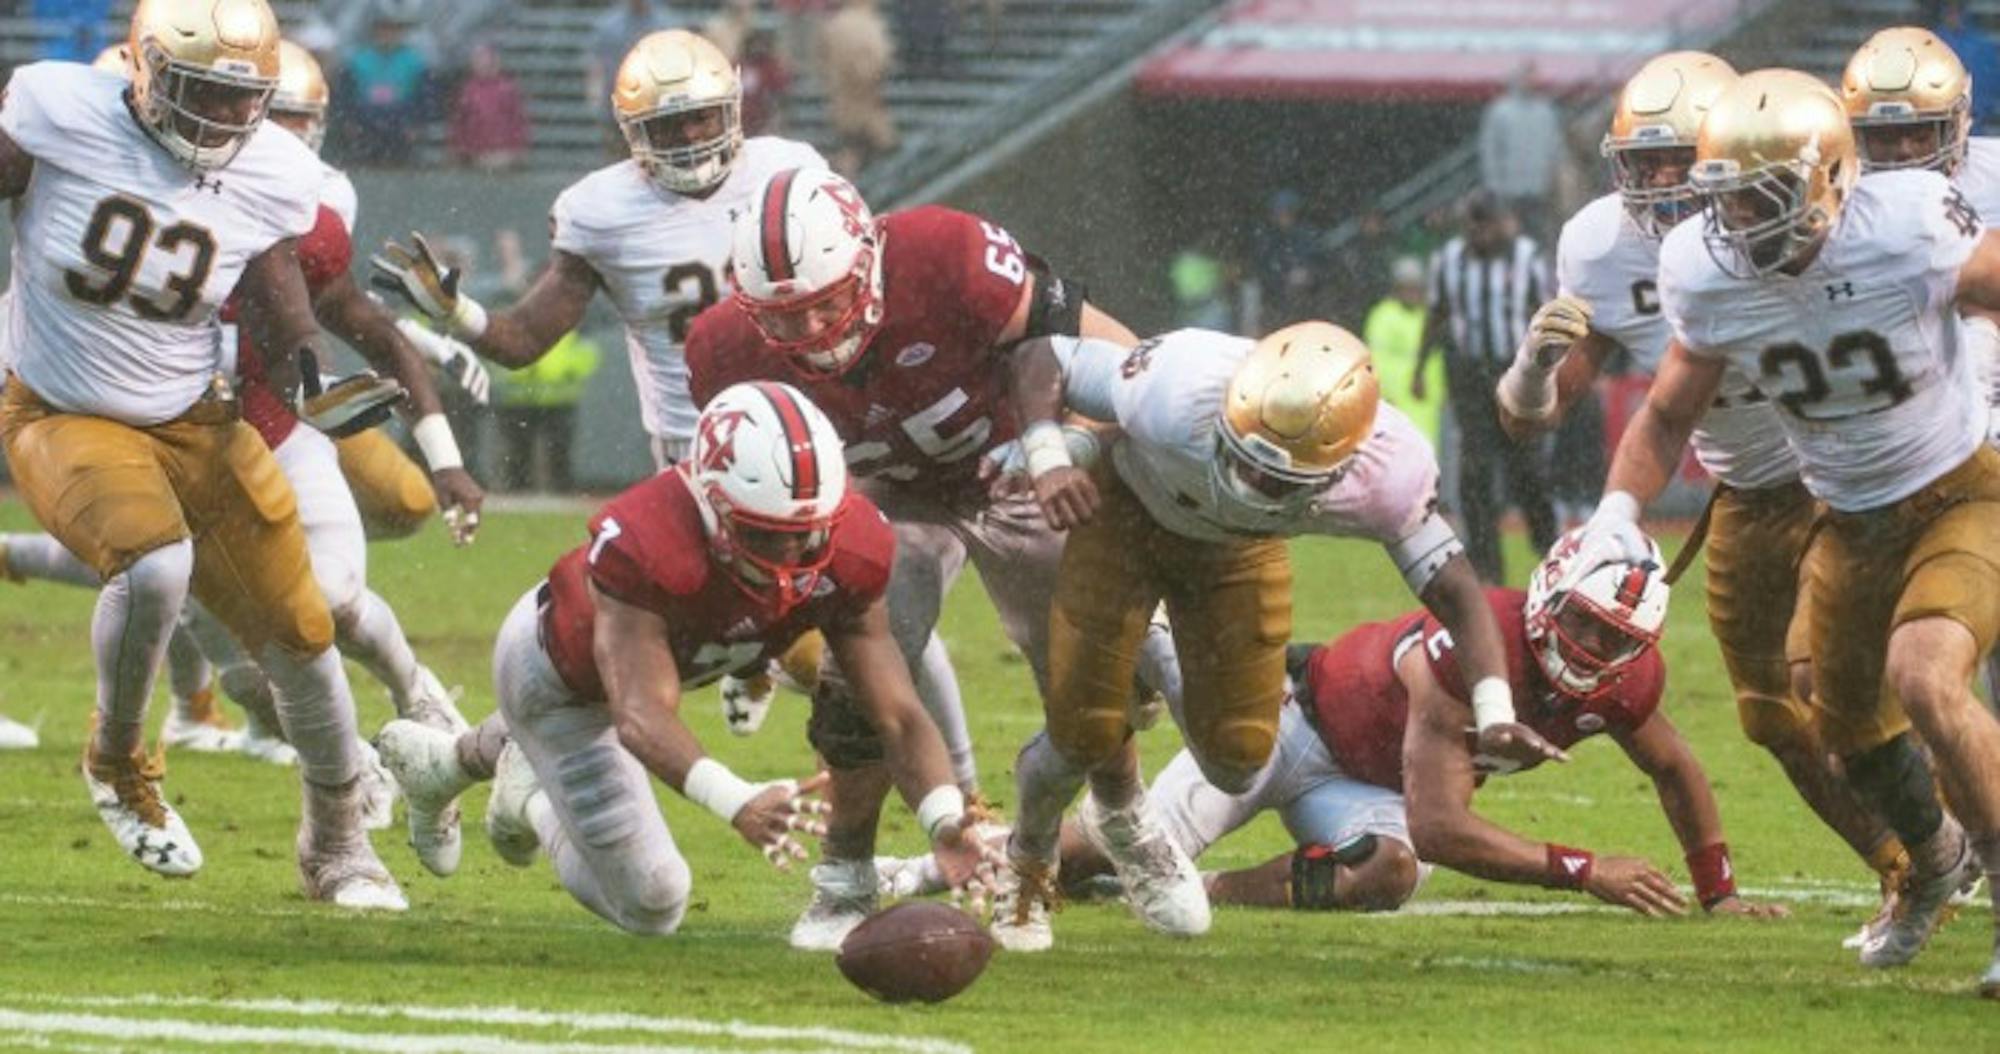 Notre Dame plays dive for a loose ball during Saturday's 10-3 loss to North Carolina State at Carter-Finley Stadium.